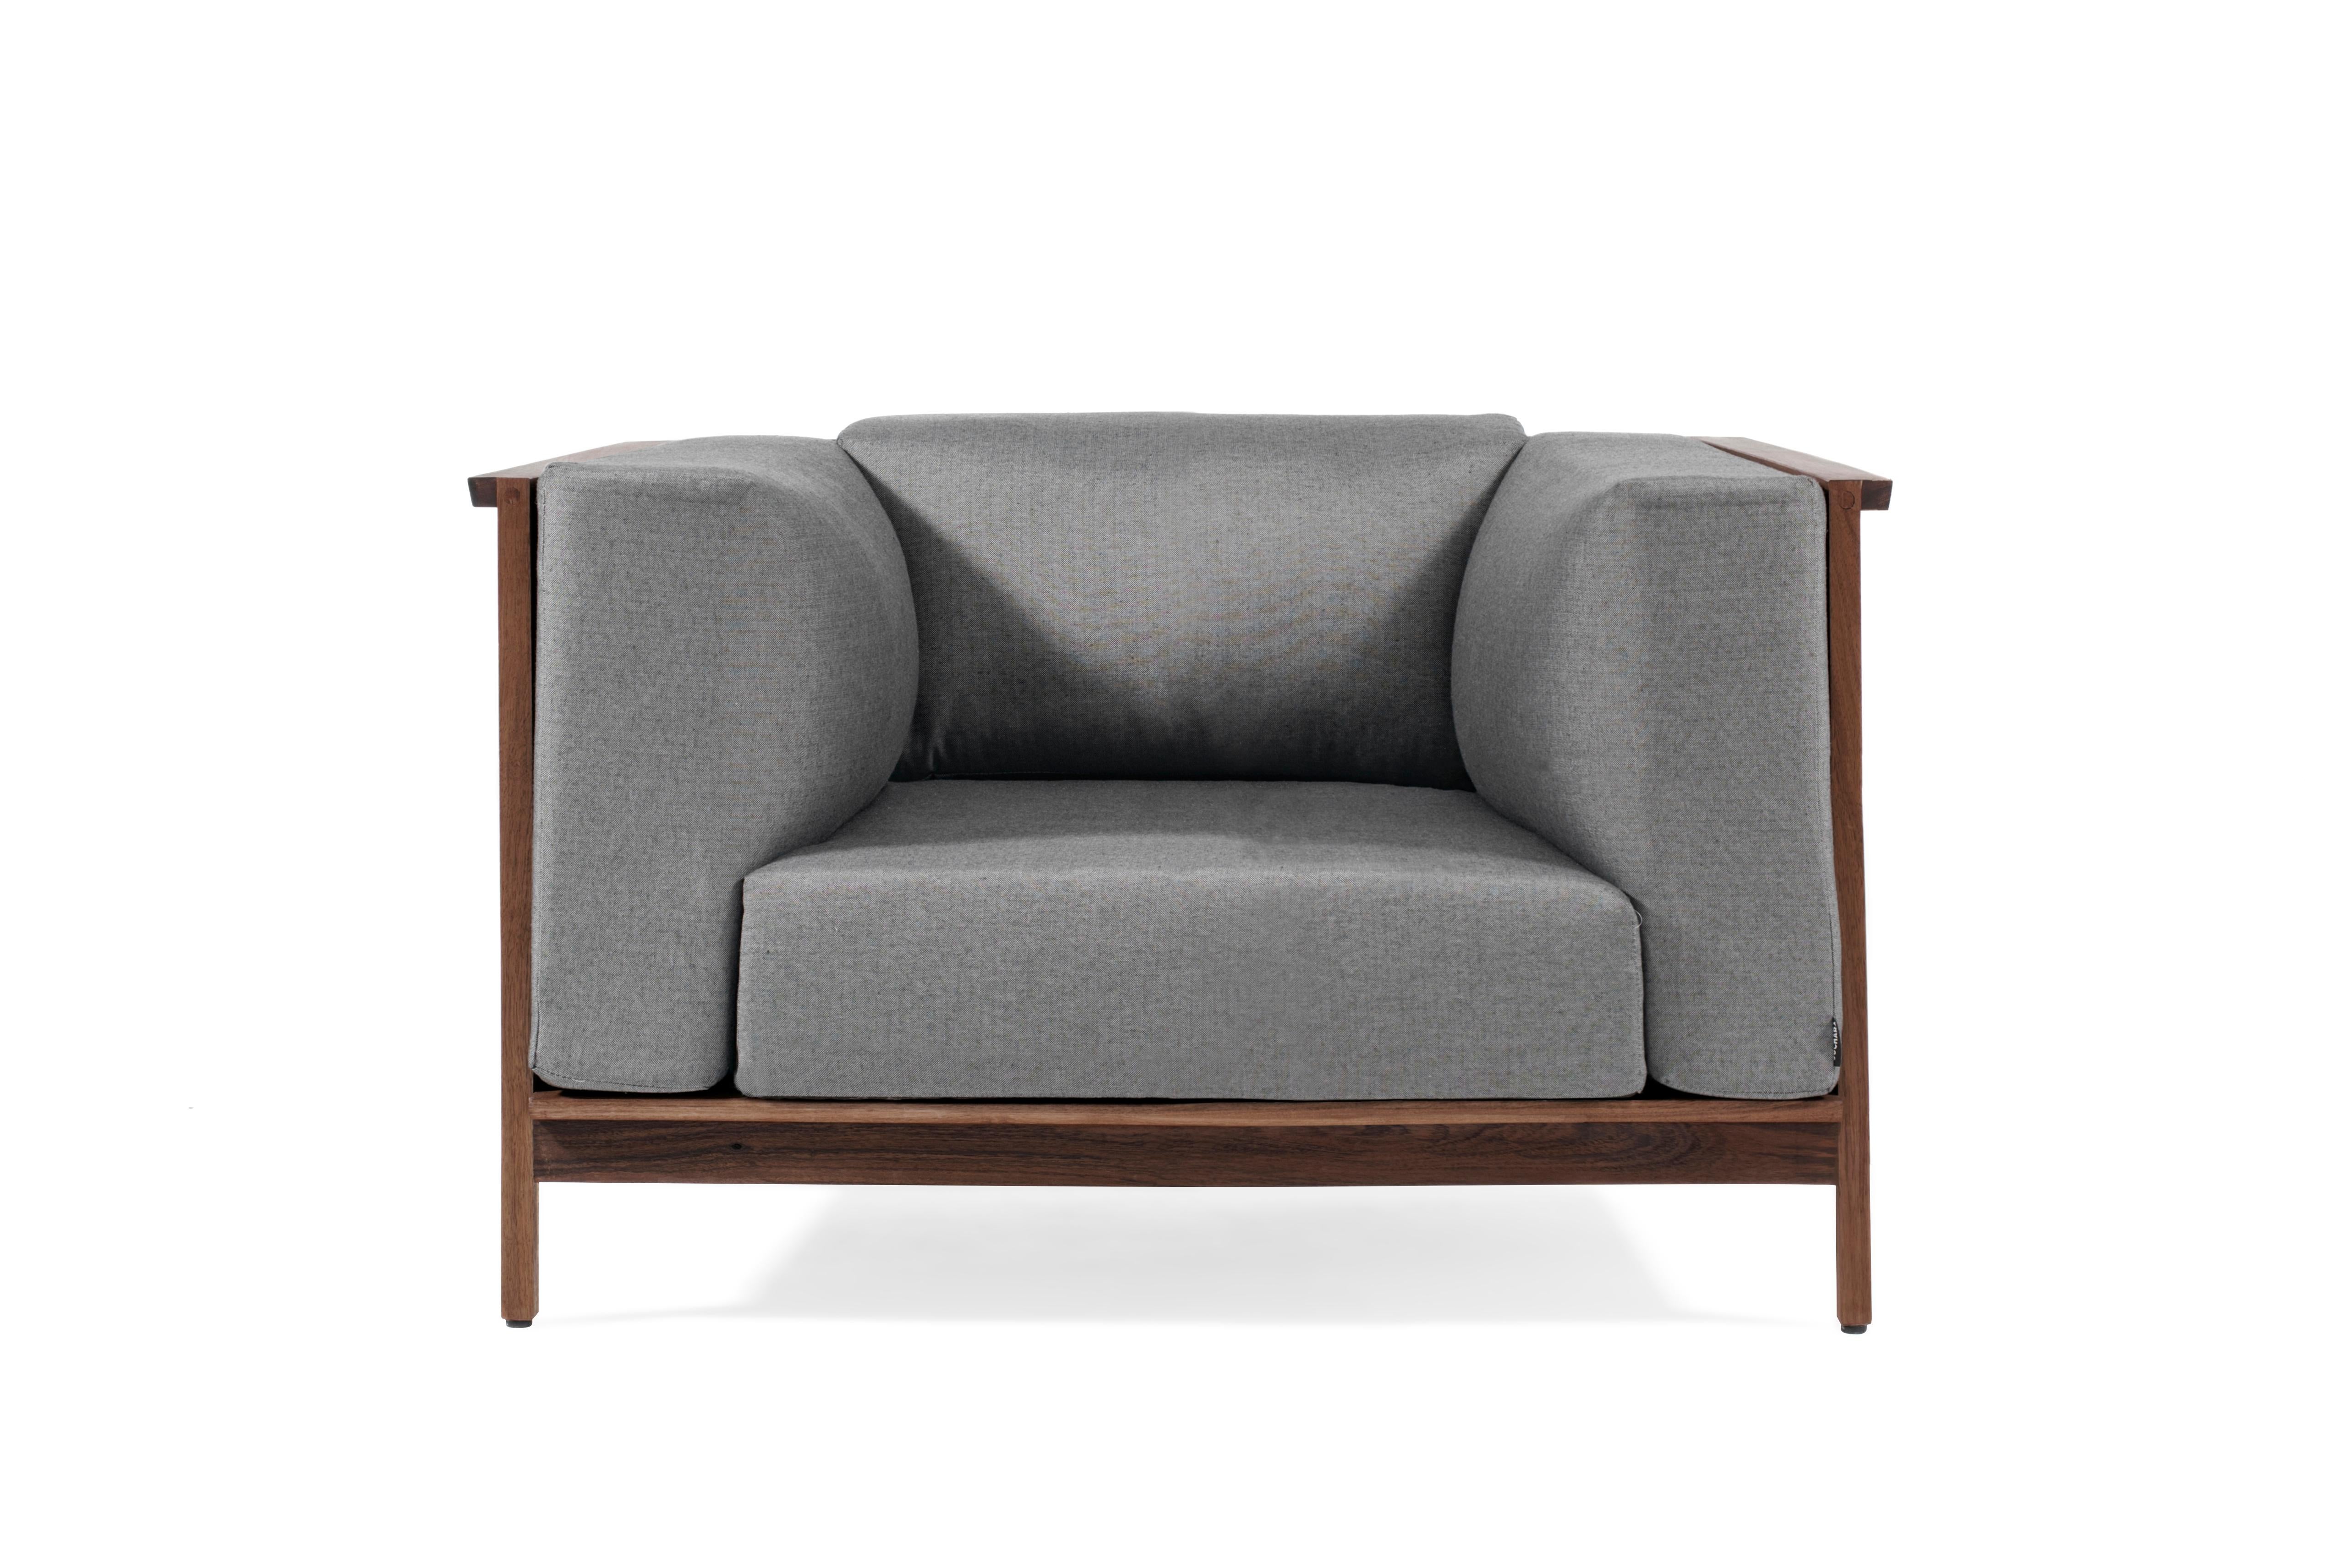 Introducing the Individual Confort, a Mexican Contemporary Armchair designed by Emiliano Molina for CUCHARA. As a part of the CONFORT Collection, this armchair represents a fusion of solid wood structures and a soft cushioning system, creating a